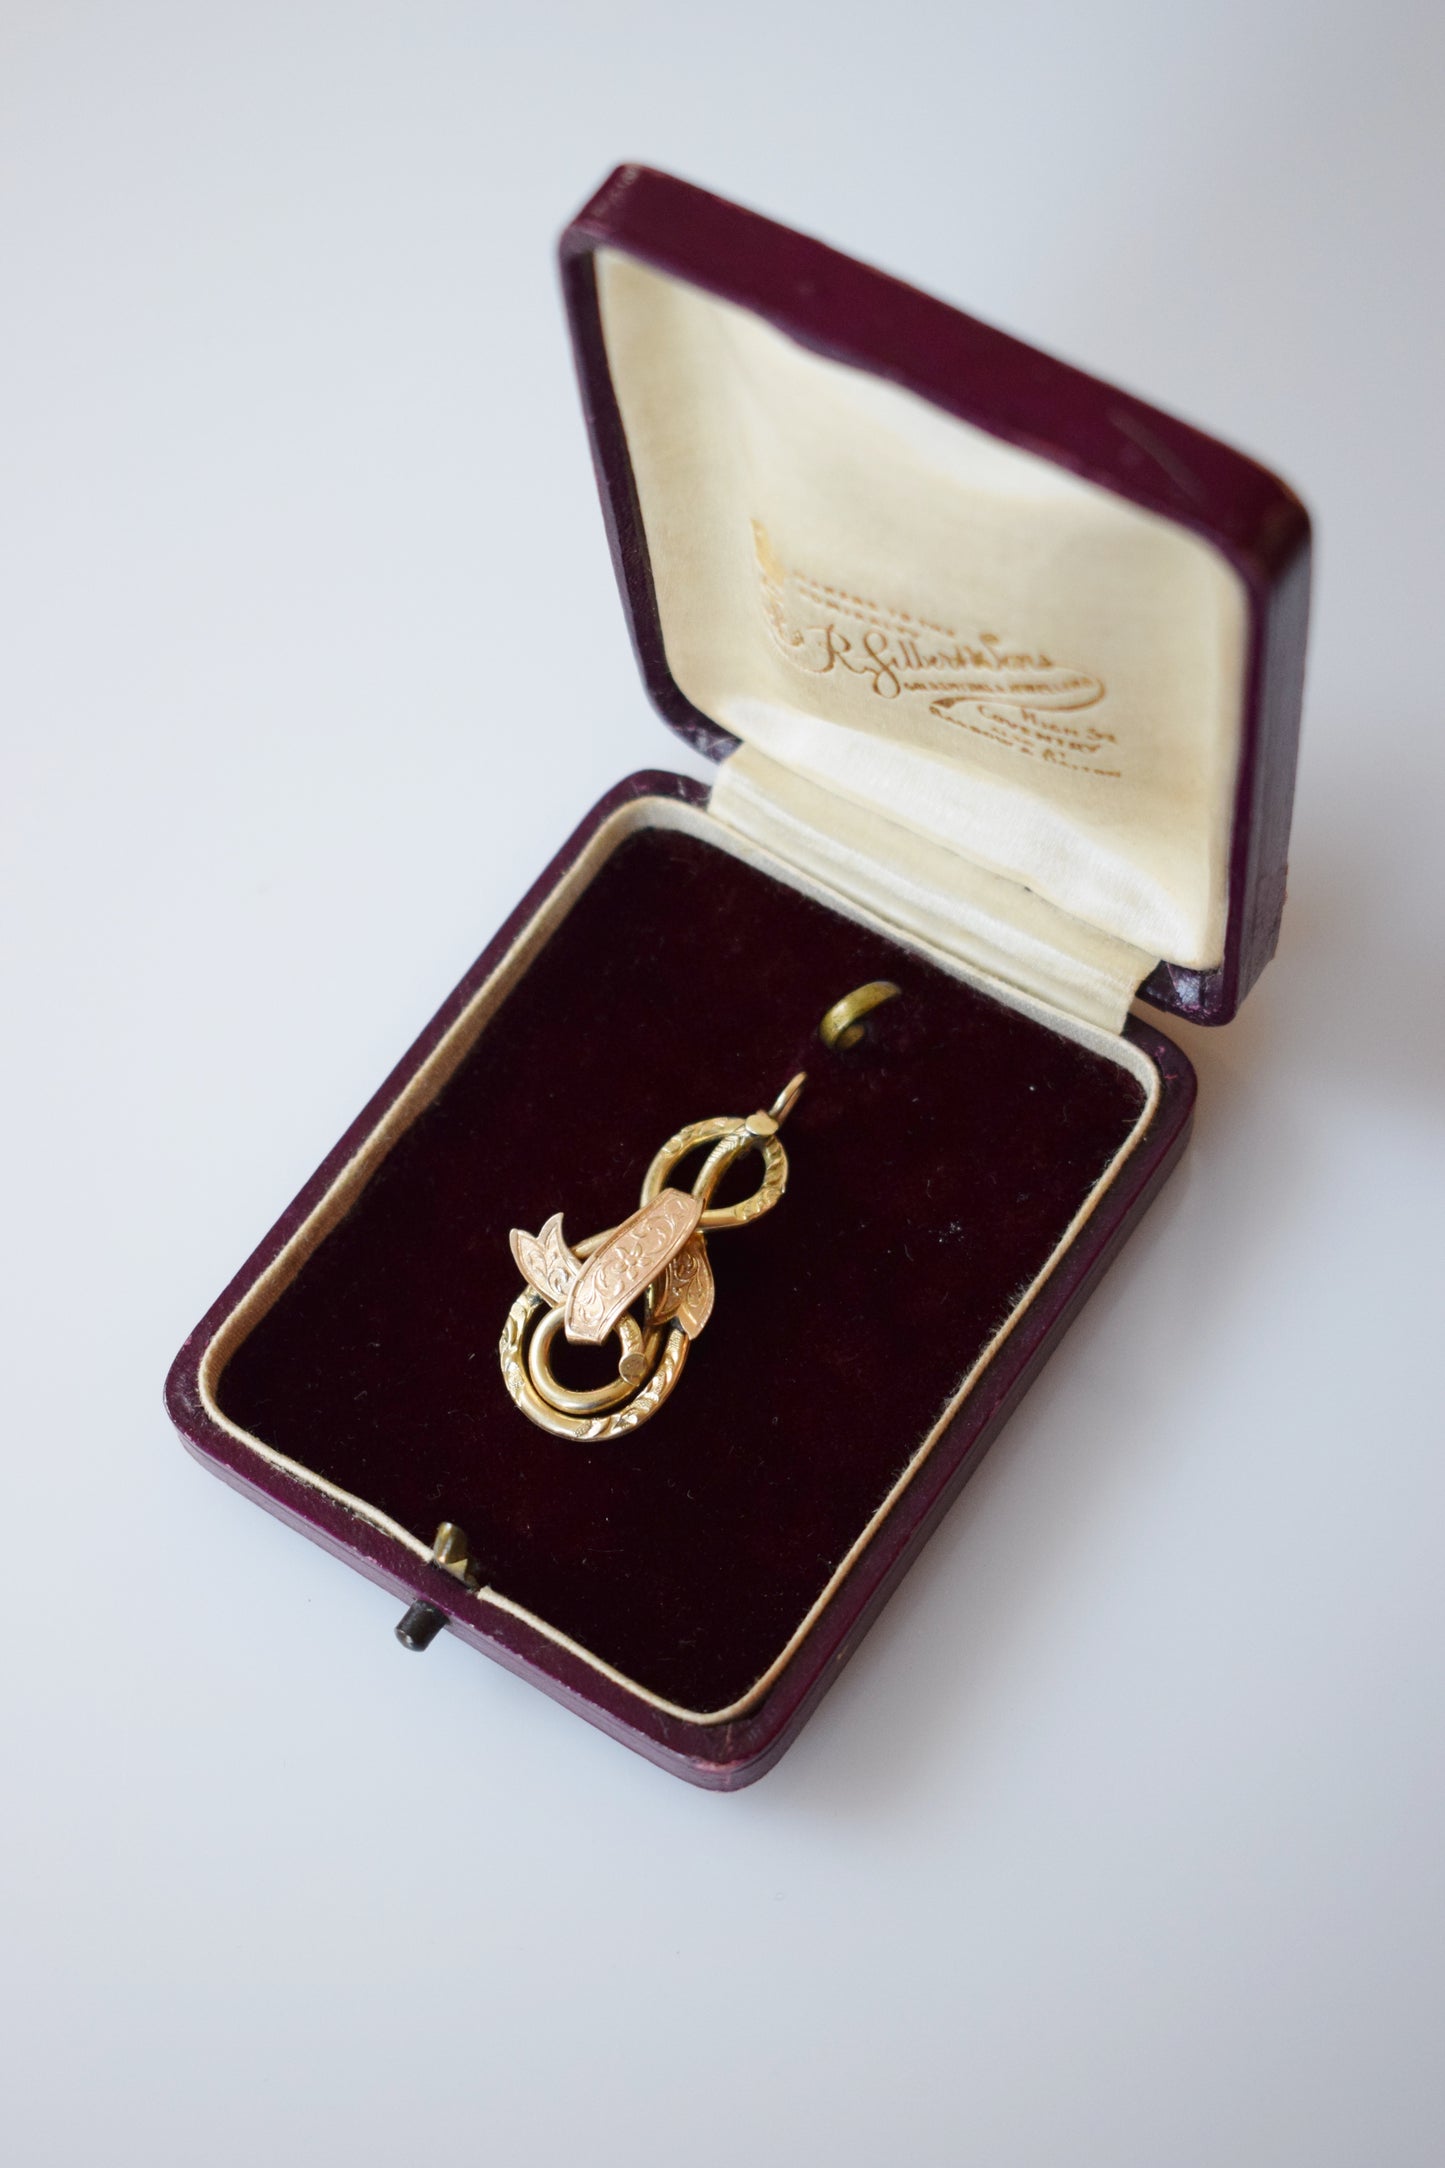 Victorian Gold Love Knot Pendant Necklace